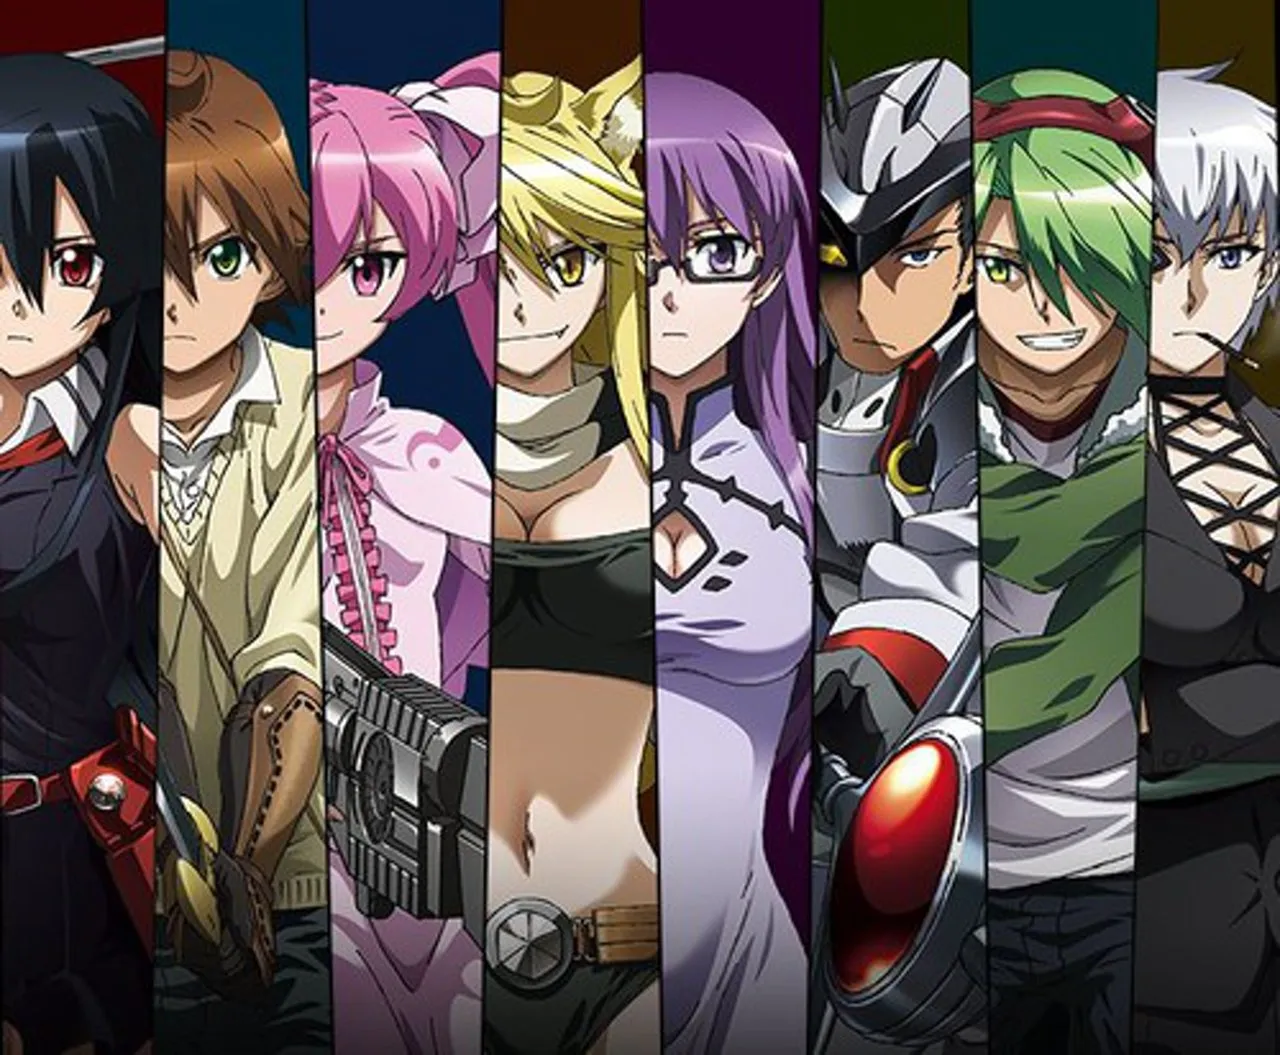 here is my list of top recommendations for animes like akame ga kill i